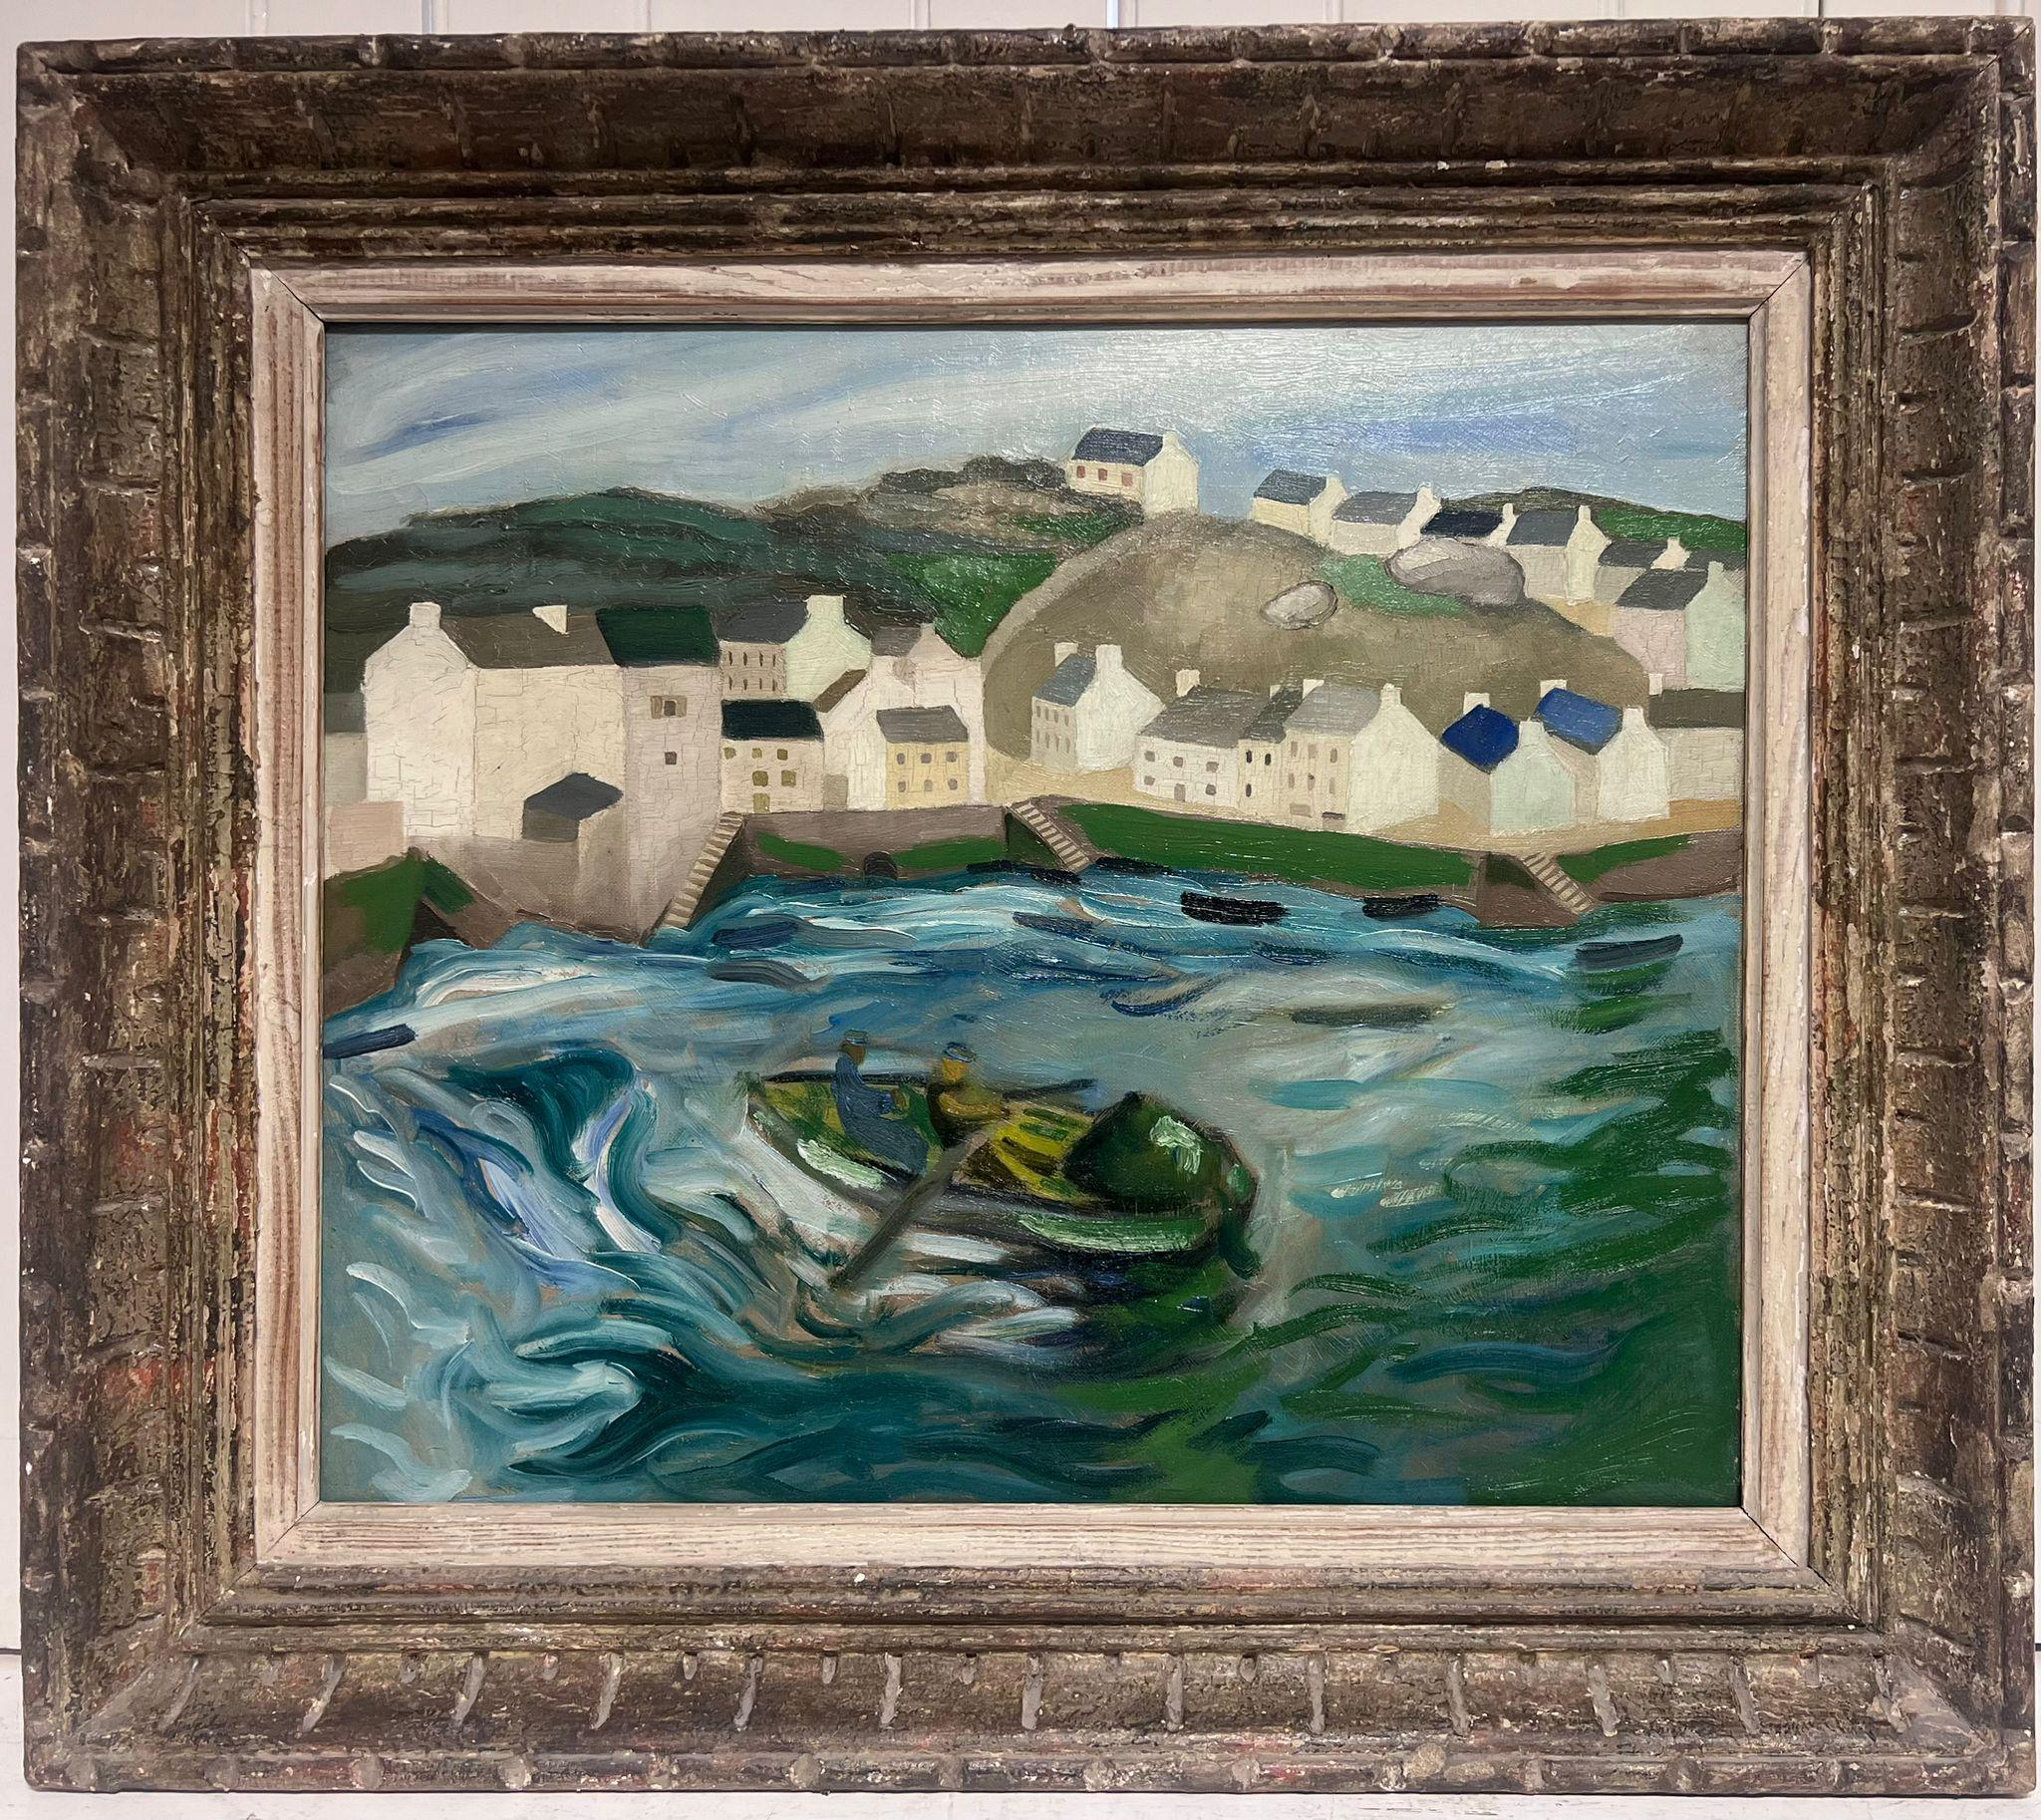 French School Landscape Painting - 1950's French Oil Painting Fishermen in Boat at Sea Breton Coastline Houses